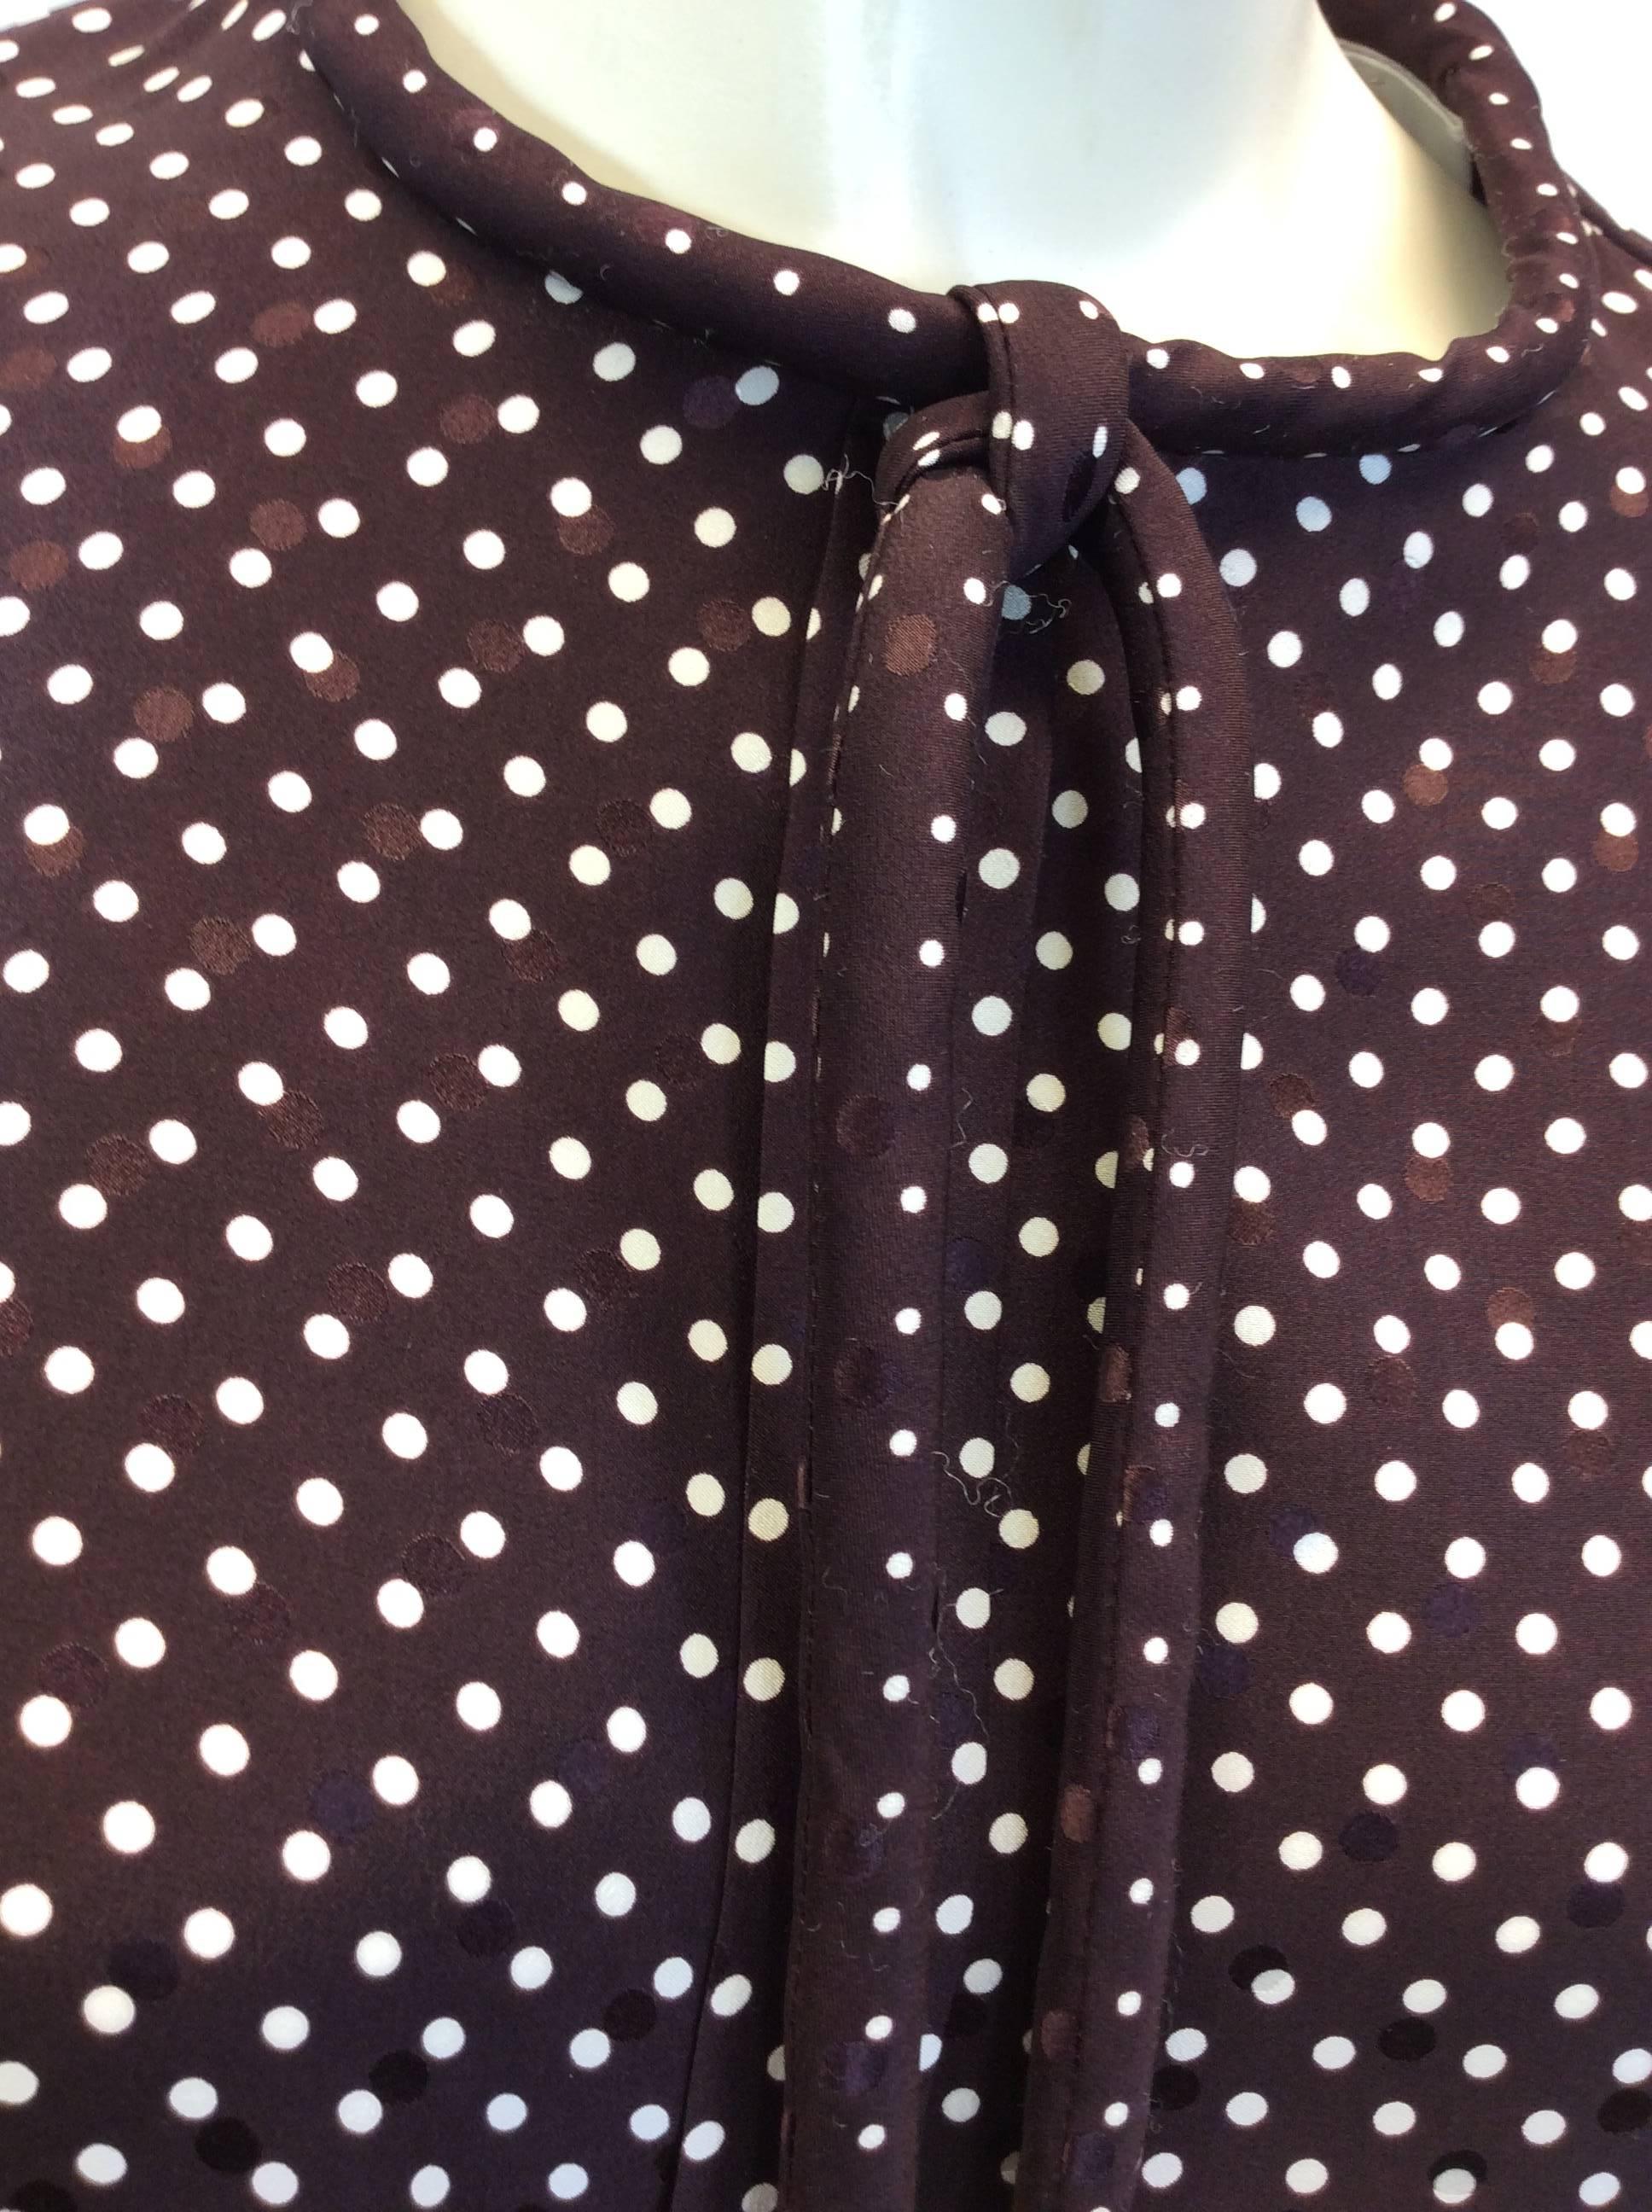 Chloe Brown Polka Dot Blouse with Neck Tie For Sale 1